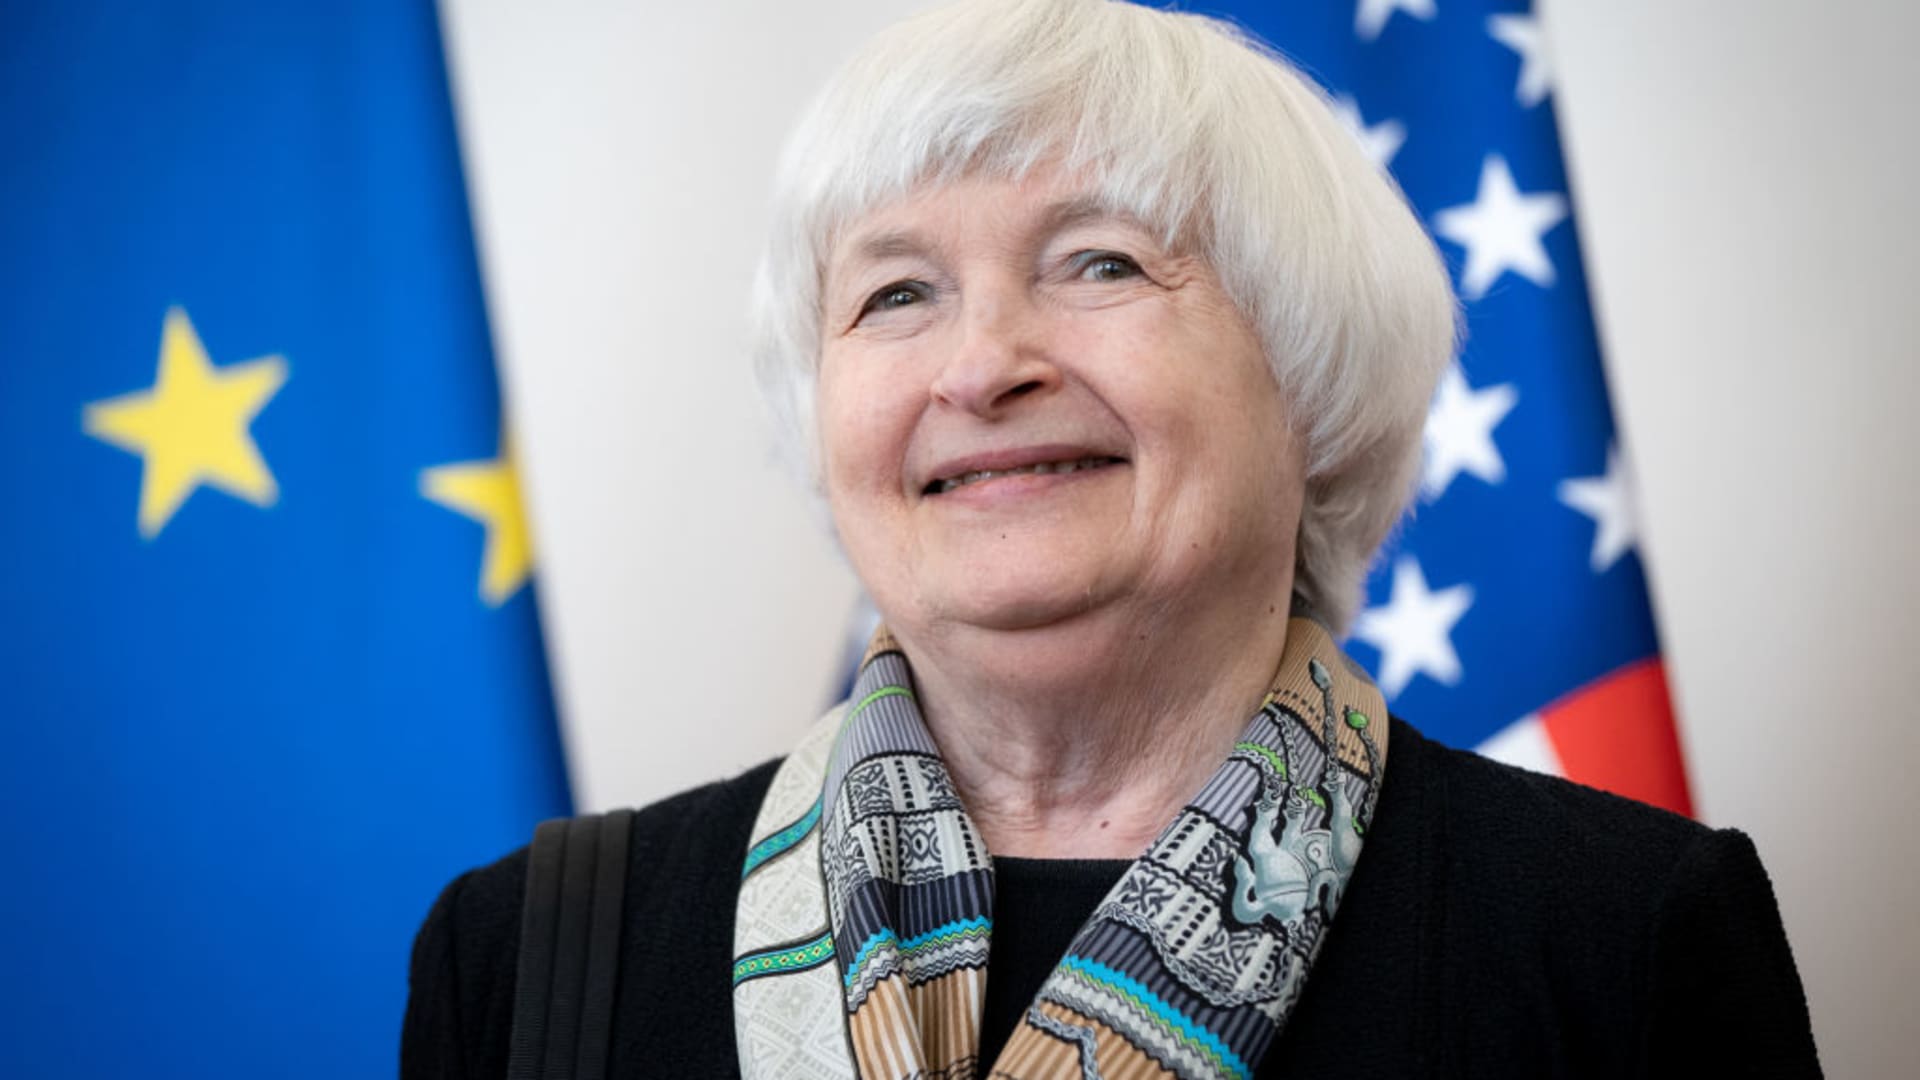 U.S. Treasury Secretary Janet Yellen at the Ministry of Finance in Warsaw, Poland on May 16, 2022